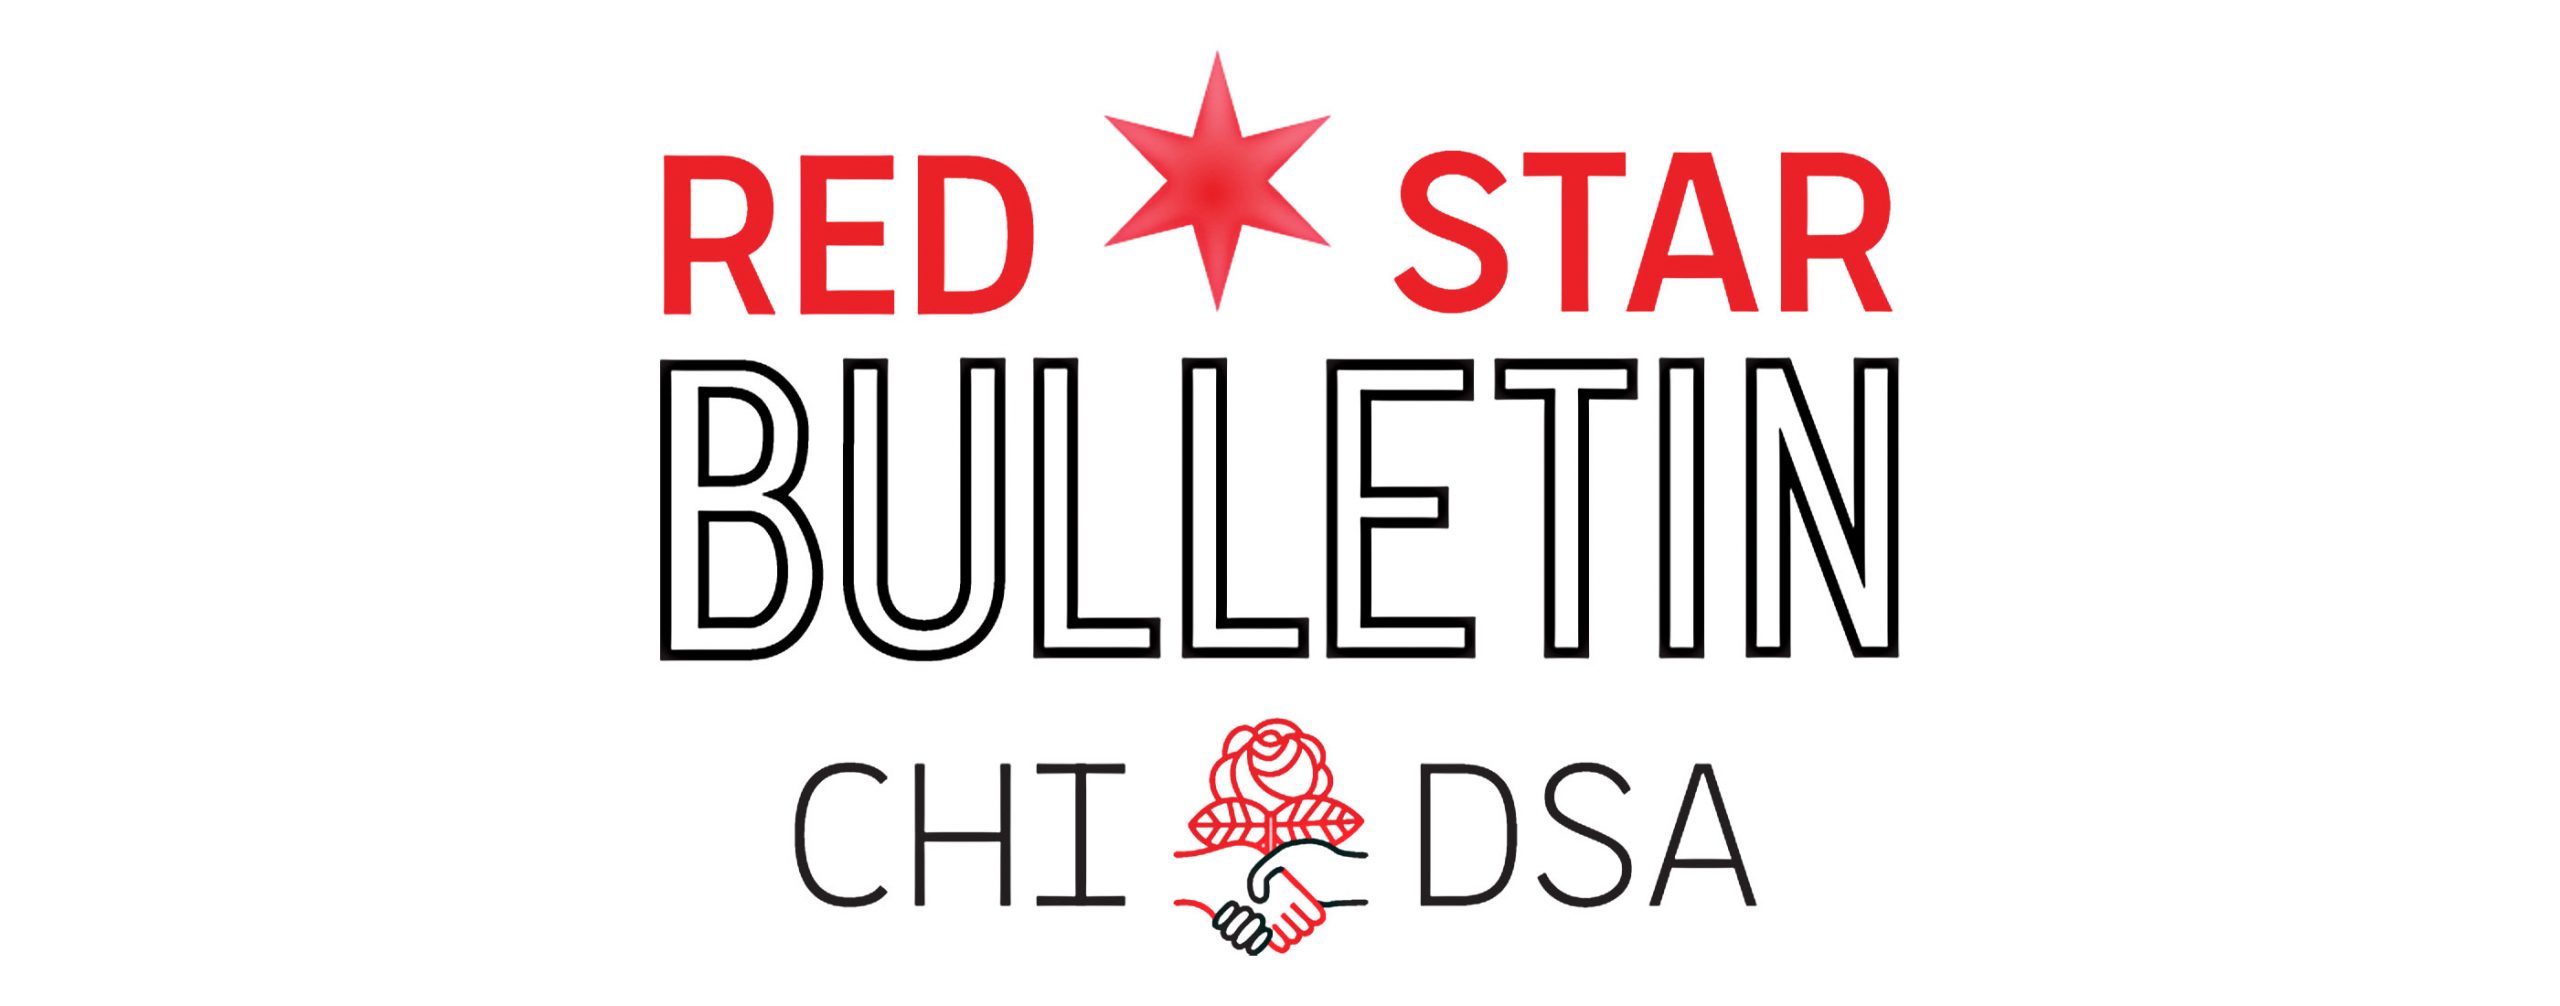 Red Star Bulletin Issue #18